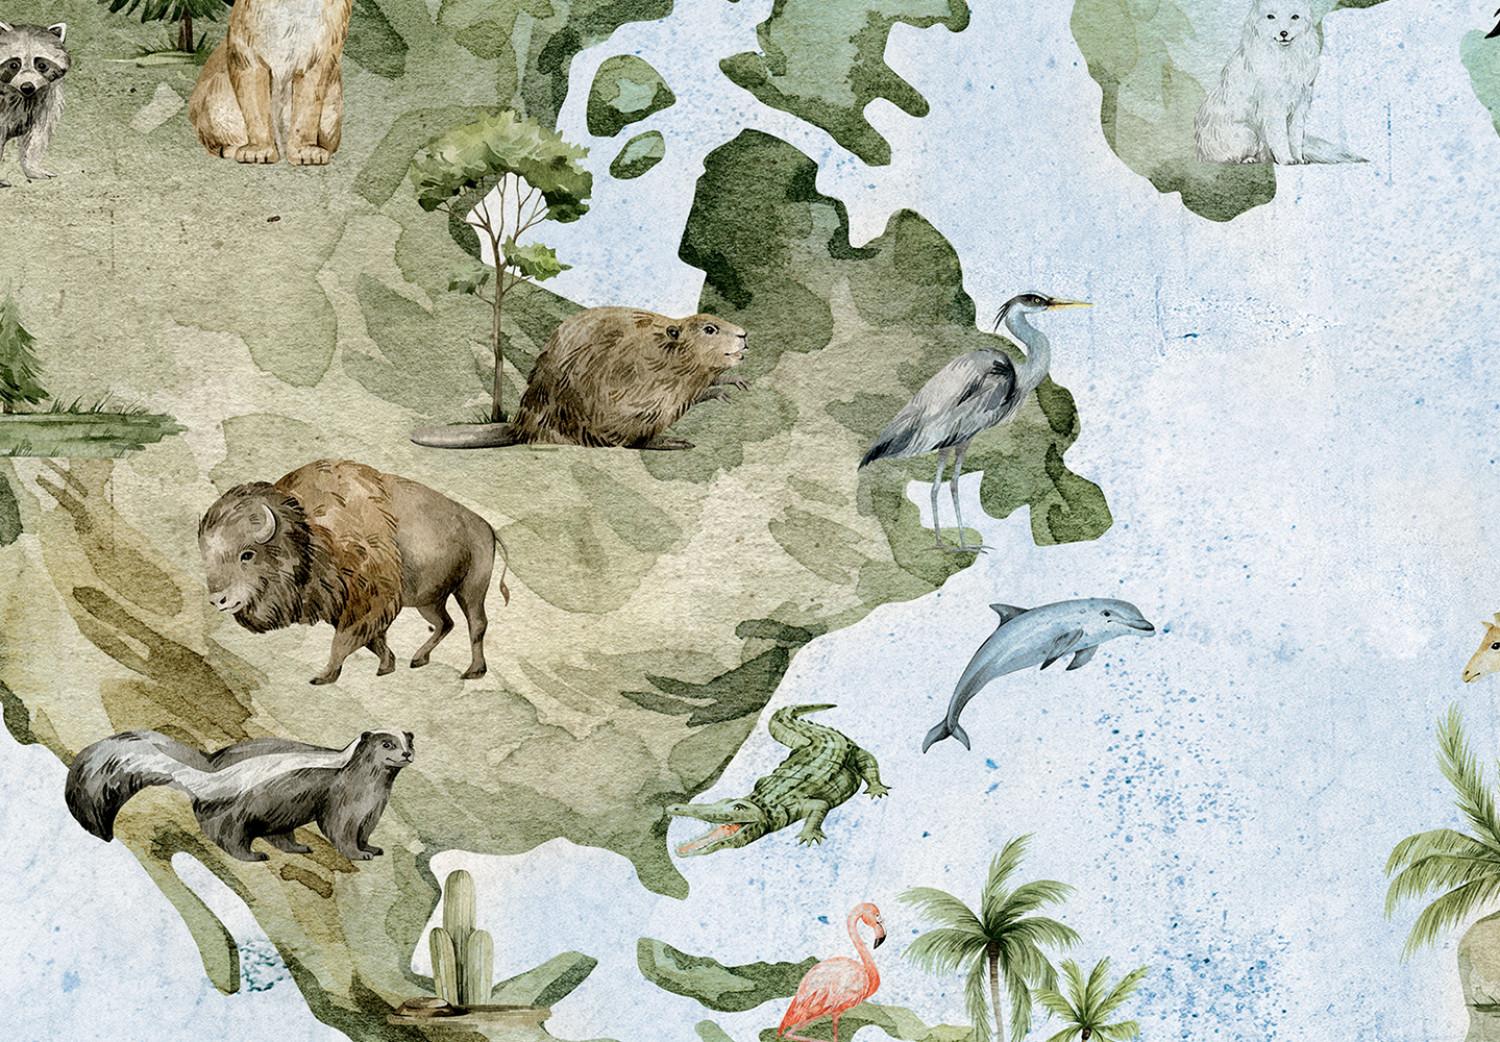 Cuadro decorativo Map for Children - Continents of the World with Animals in the Colors of Nature